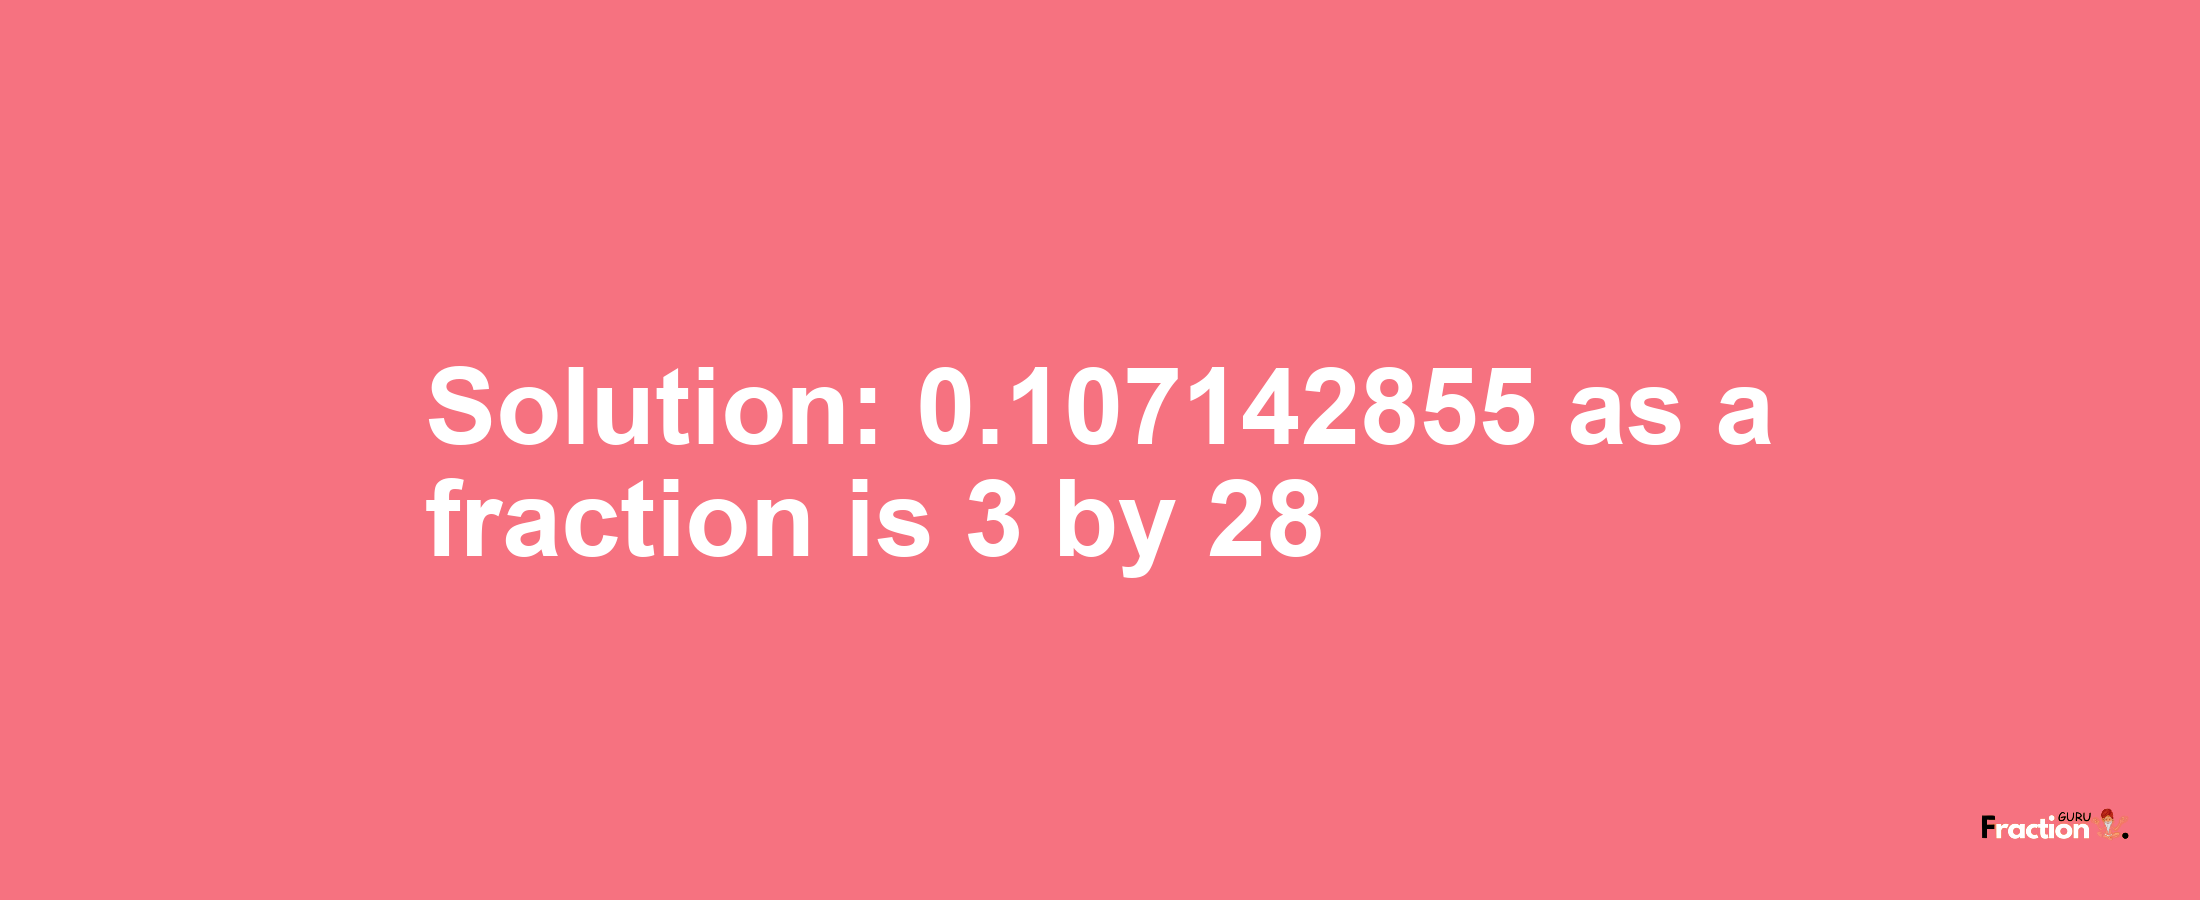 Solution:0.107142855 as a fraction is 3/28